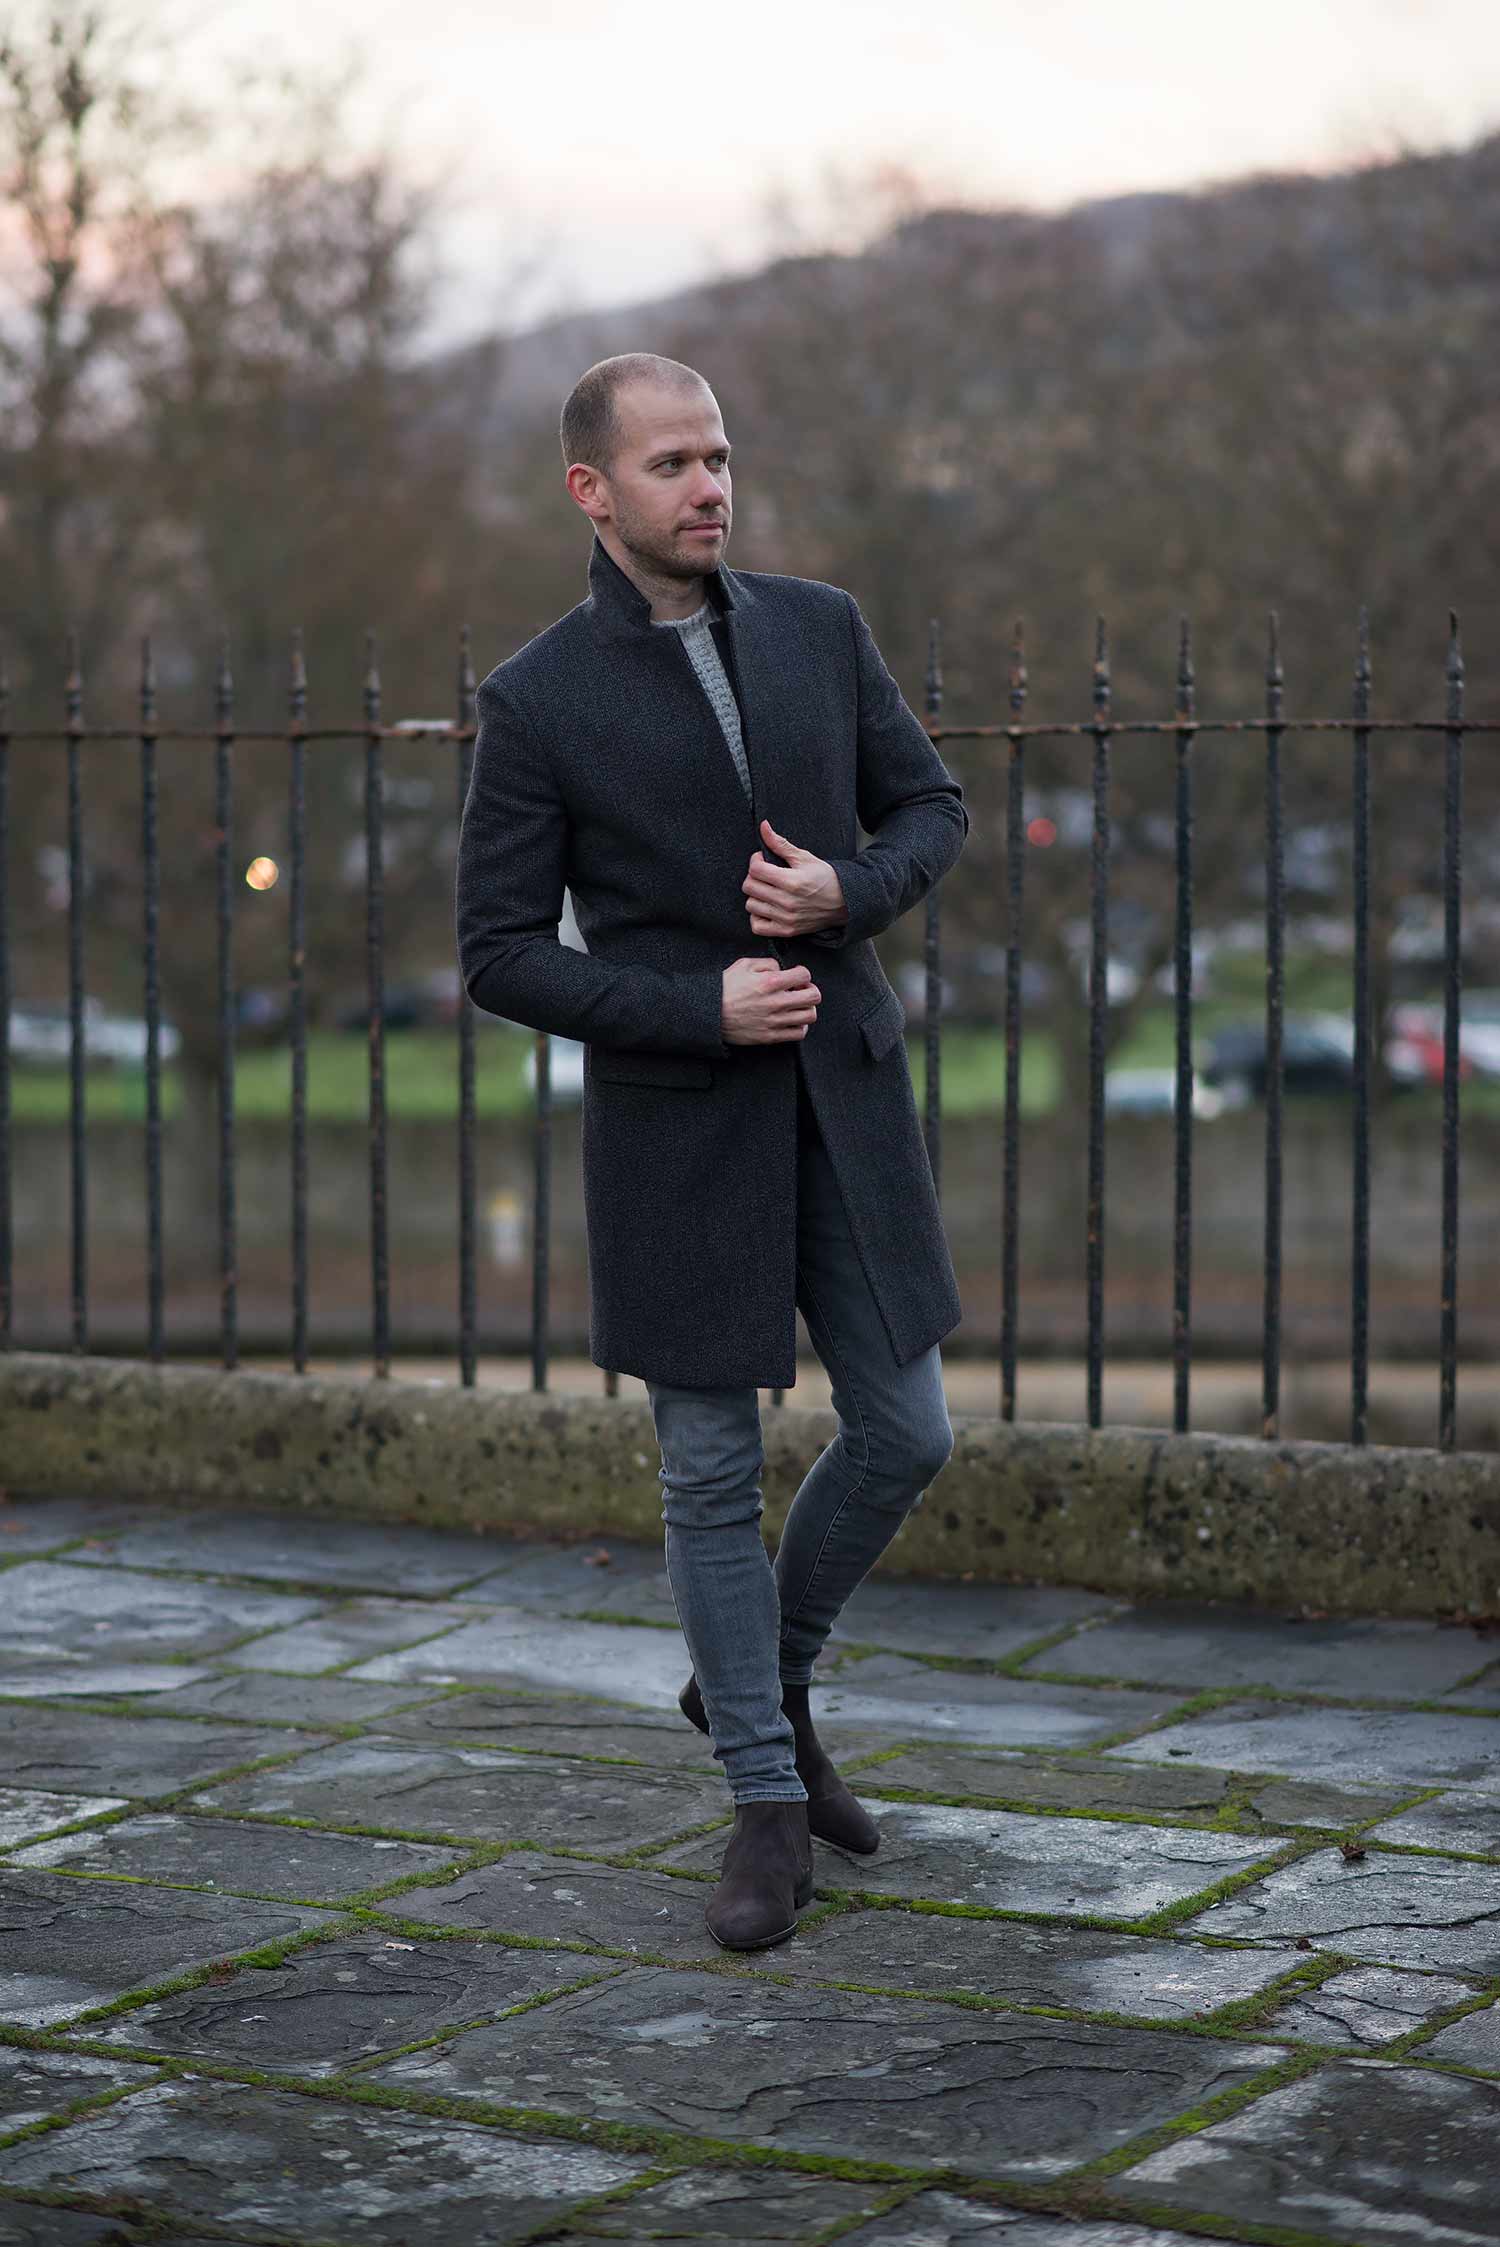 Allsaints Falun Overcoat with J Brand Grey Skinny Jeans Outfit | Your  Average Guy